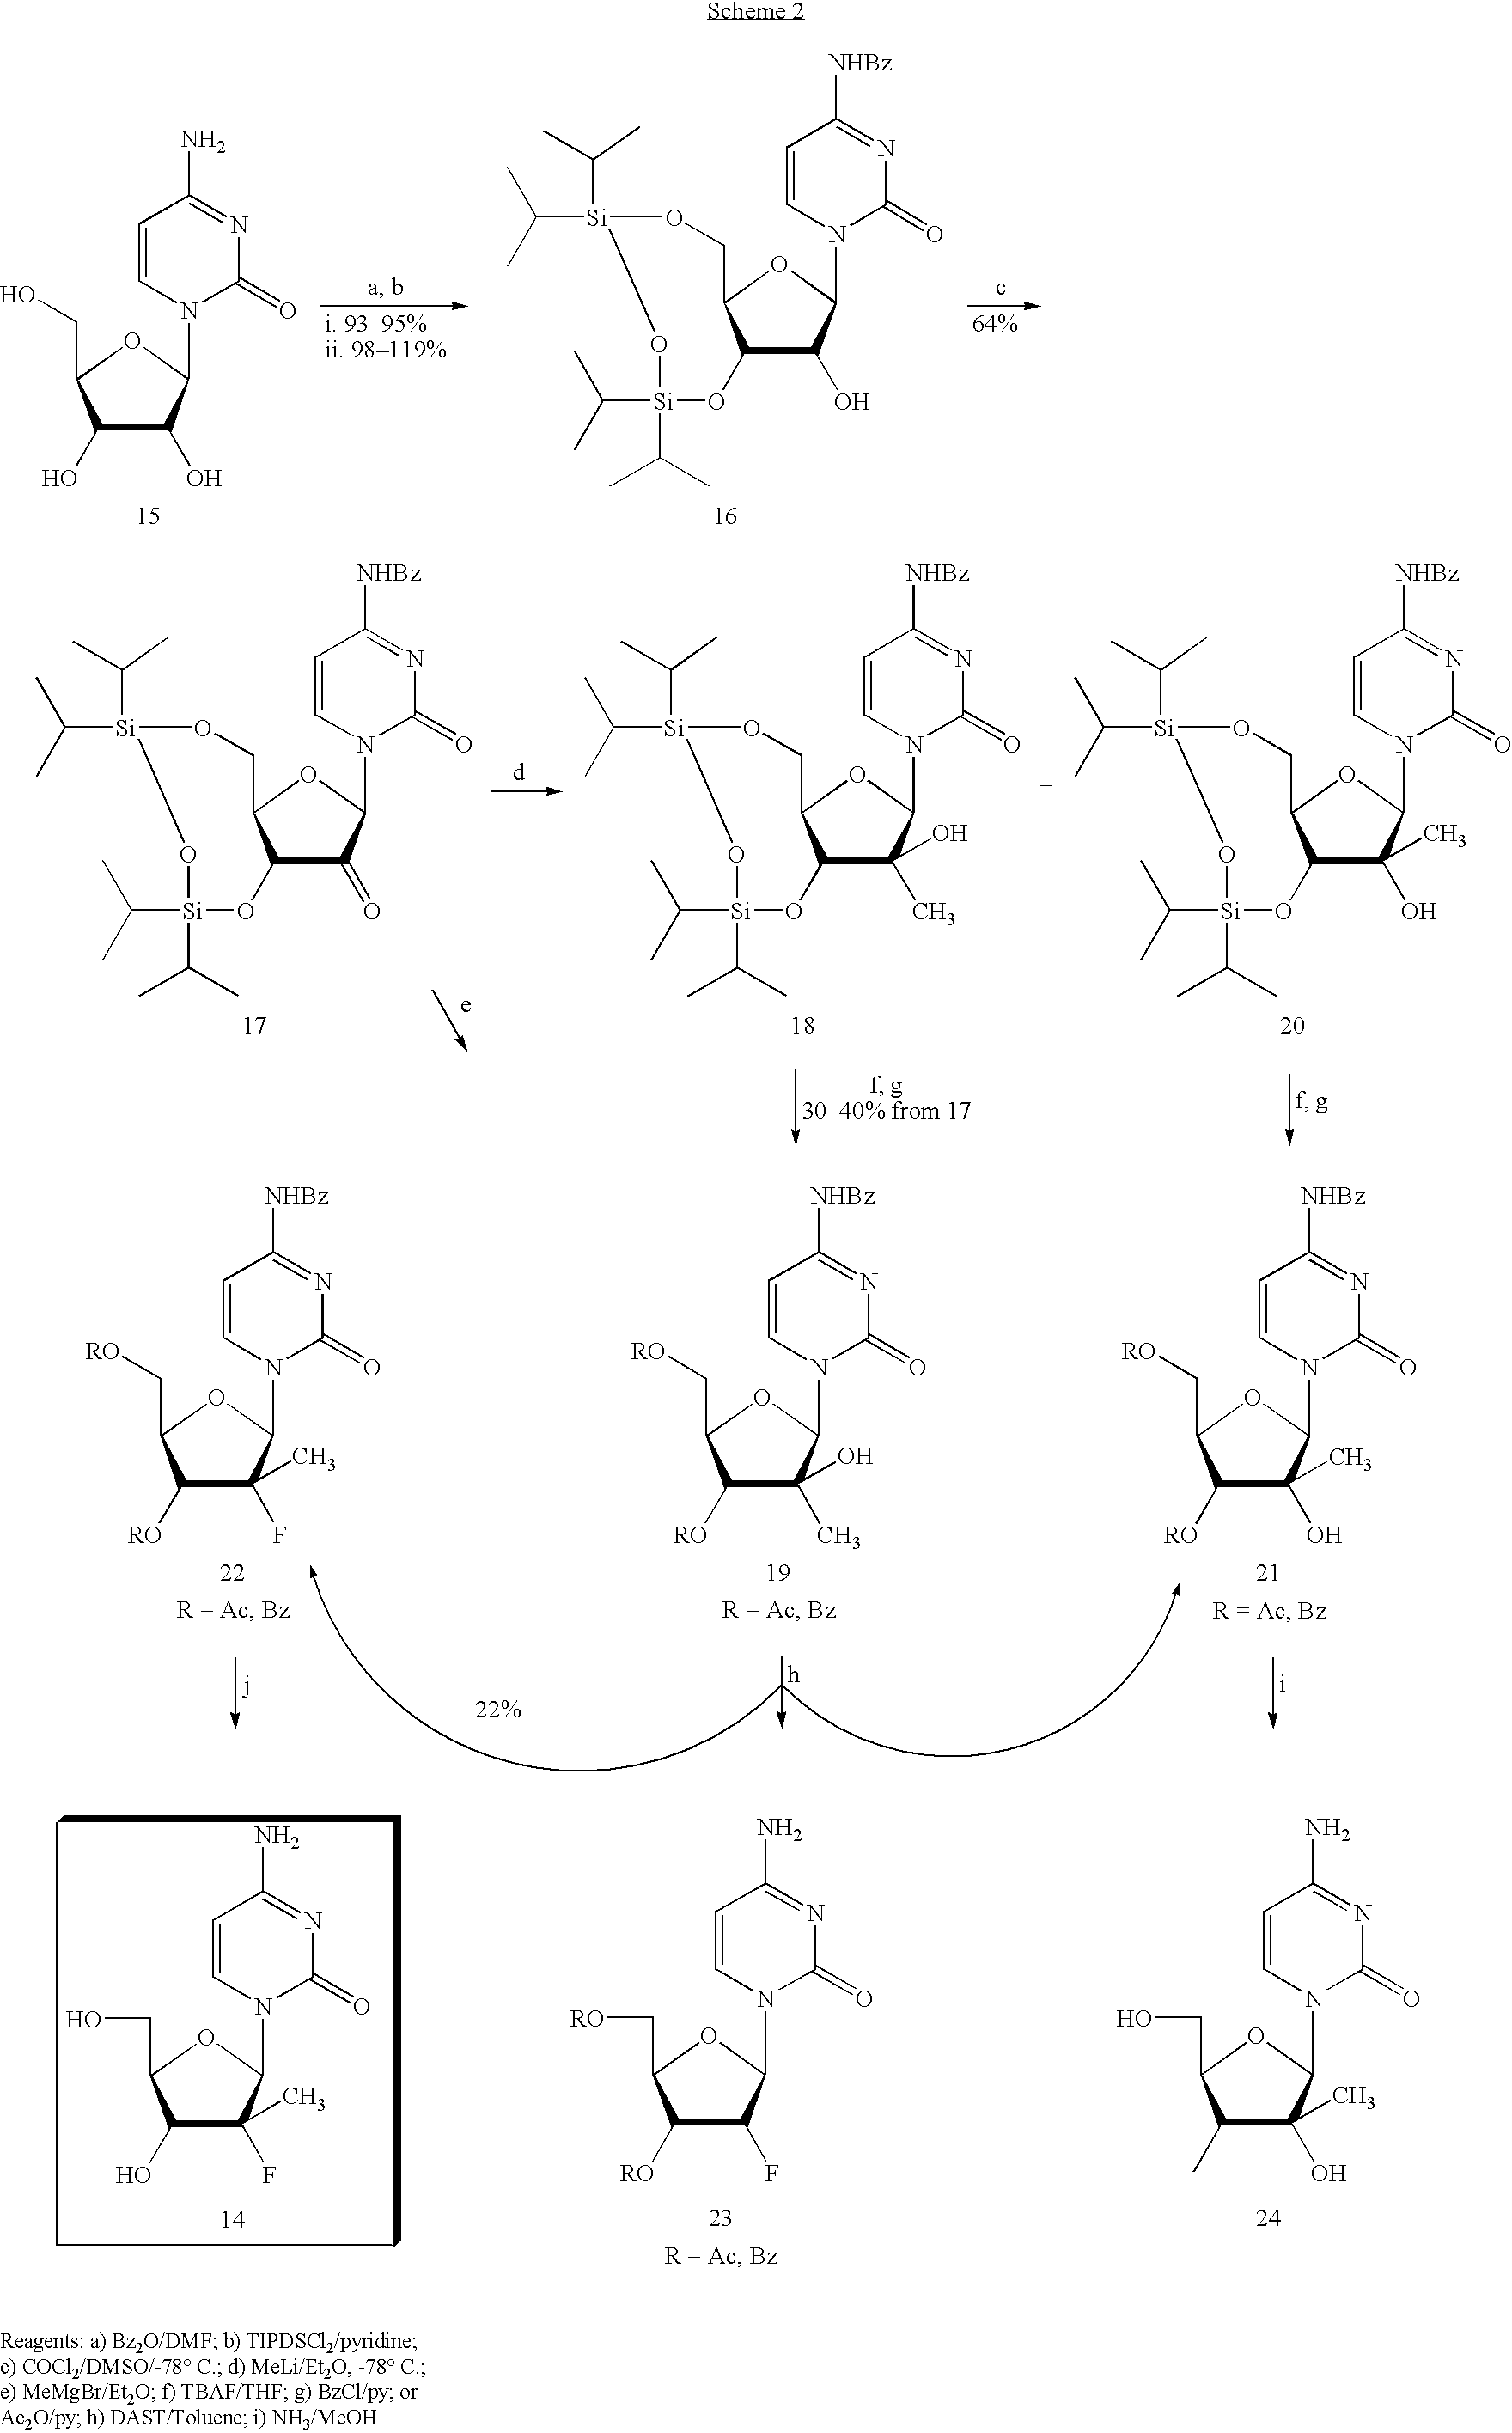 Preparation of alkyl-substituted 2-deoxy-2-fluoro-D-ribofuranosyl pyrimidines and purines and their derivatives